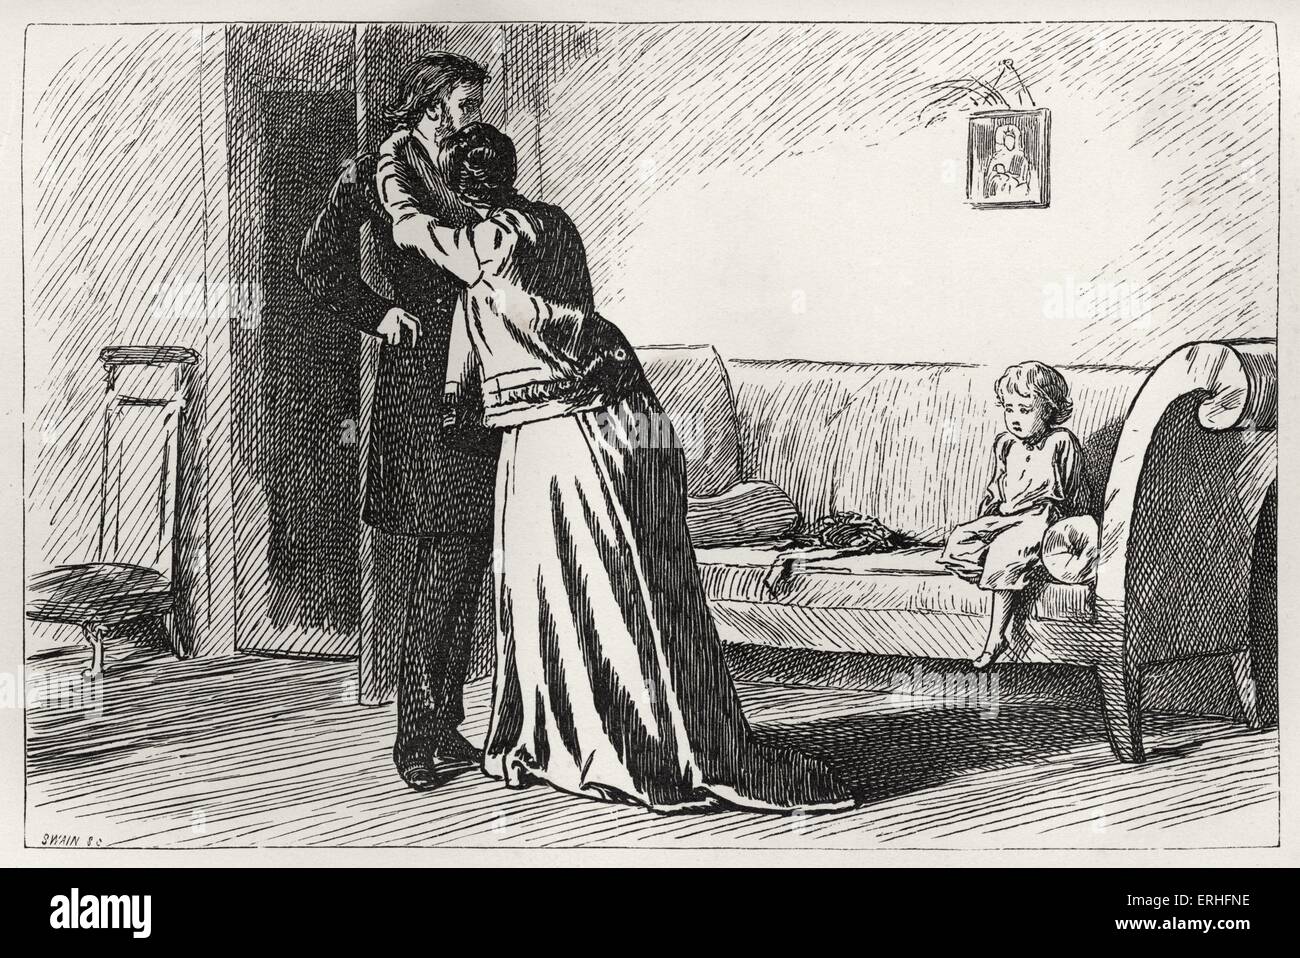 Anthony Trollope's novel 'He Knew He Was Right' -   Illustration captioned 'It is hard to speak sometimes' from original 1869 Stock Photo